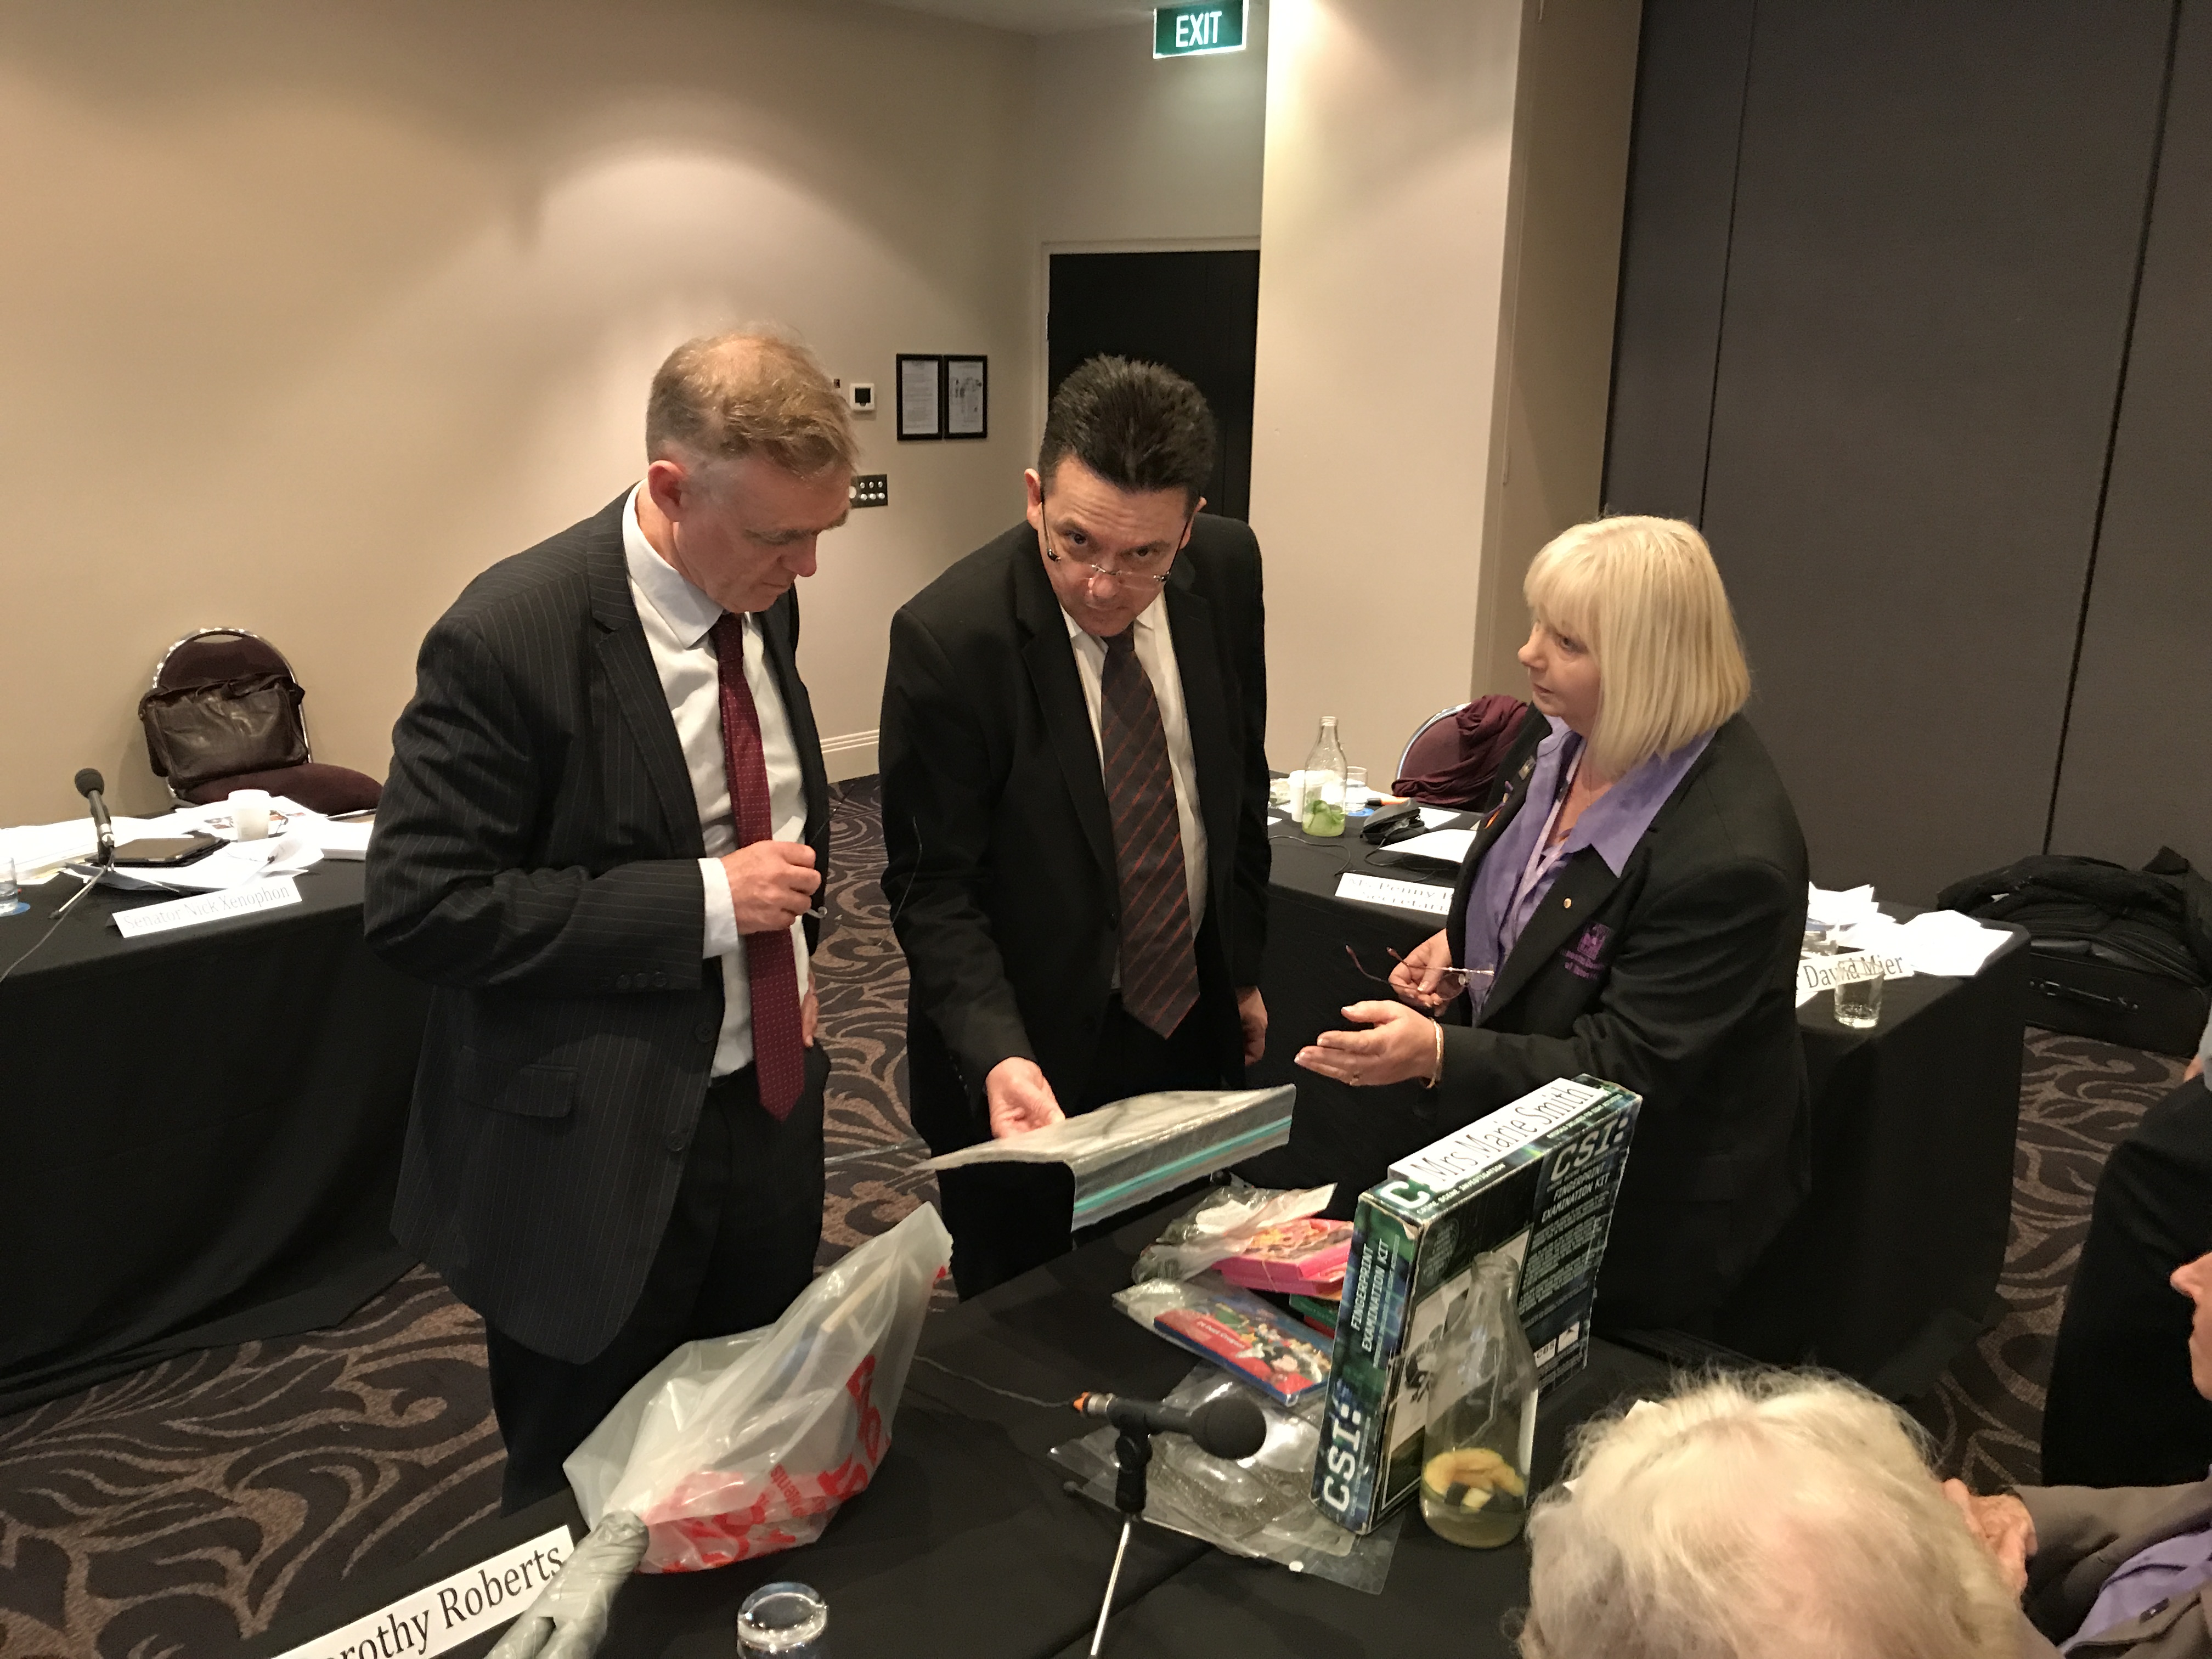 L-R: Senators Chris Ketter [Chair], Nick Xenophon and Vicki Hamilton of the Asbestos Council of Victoria examine products containing asbestos at a hearing in Melbourne, 14 July 2017.